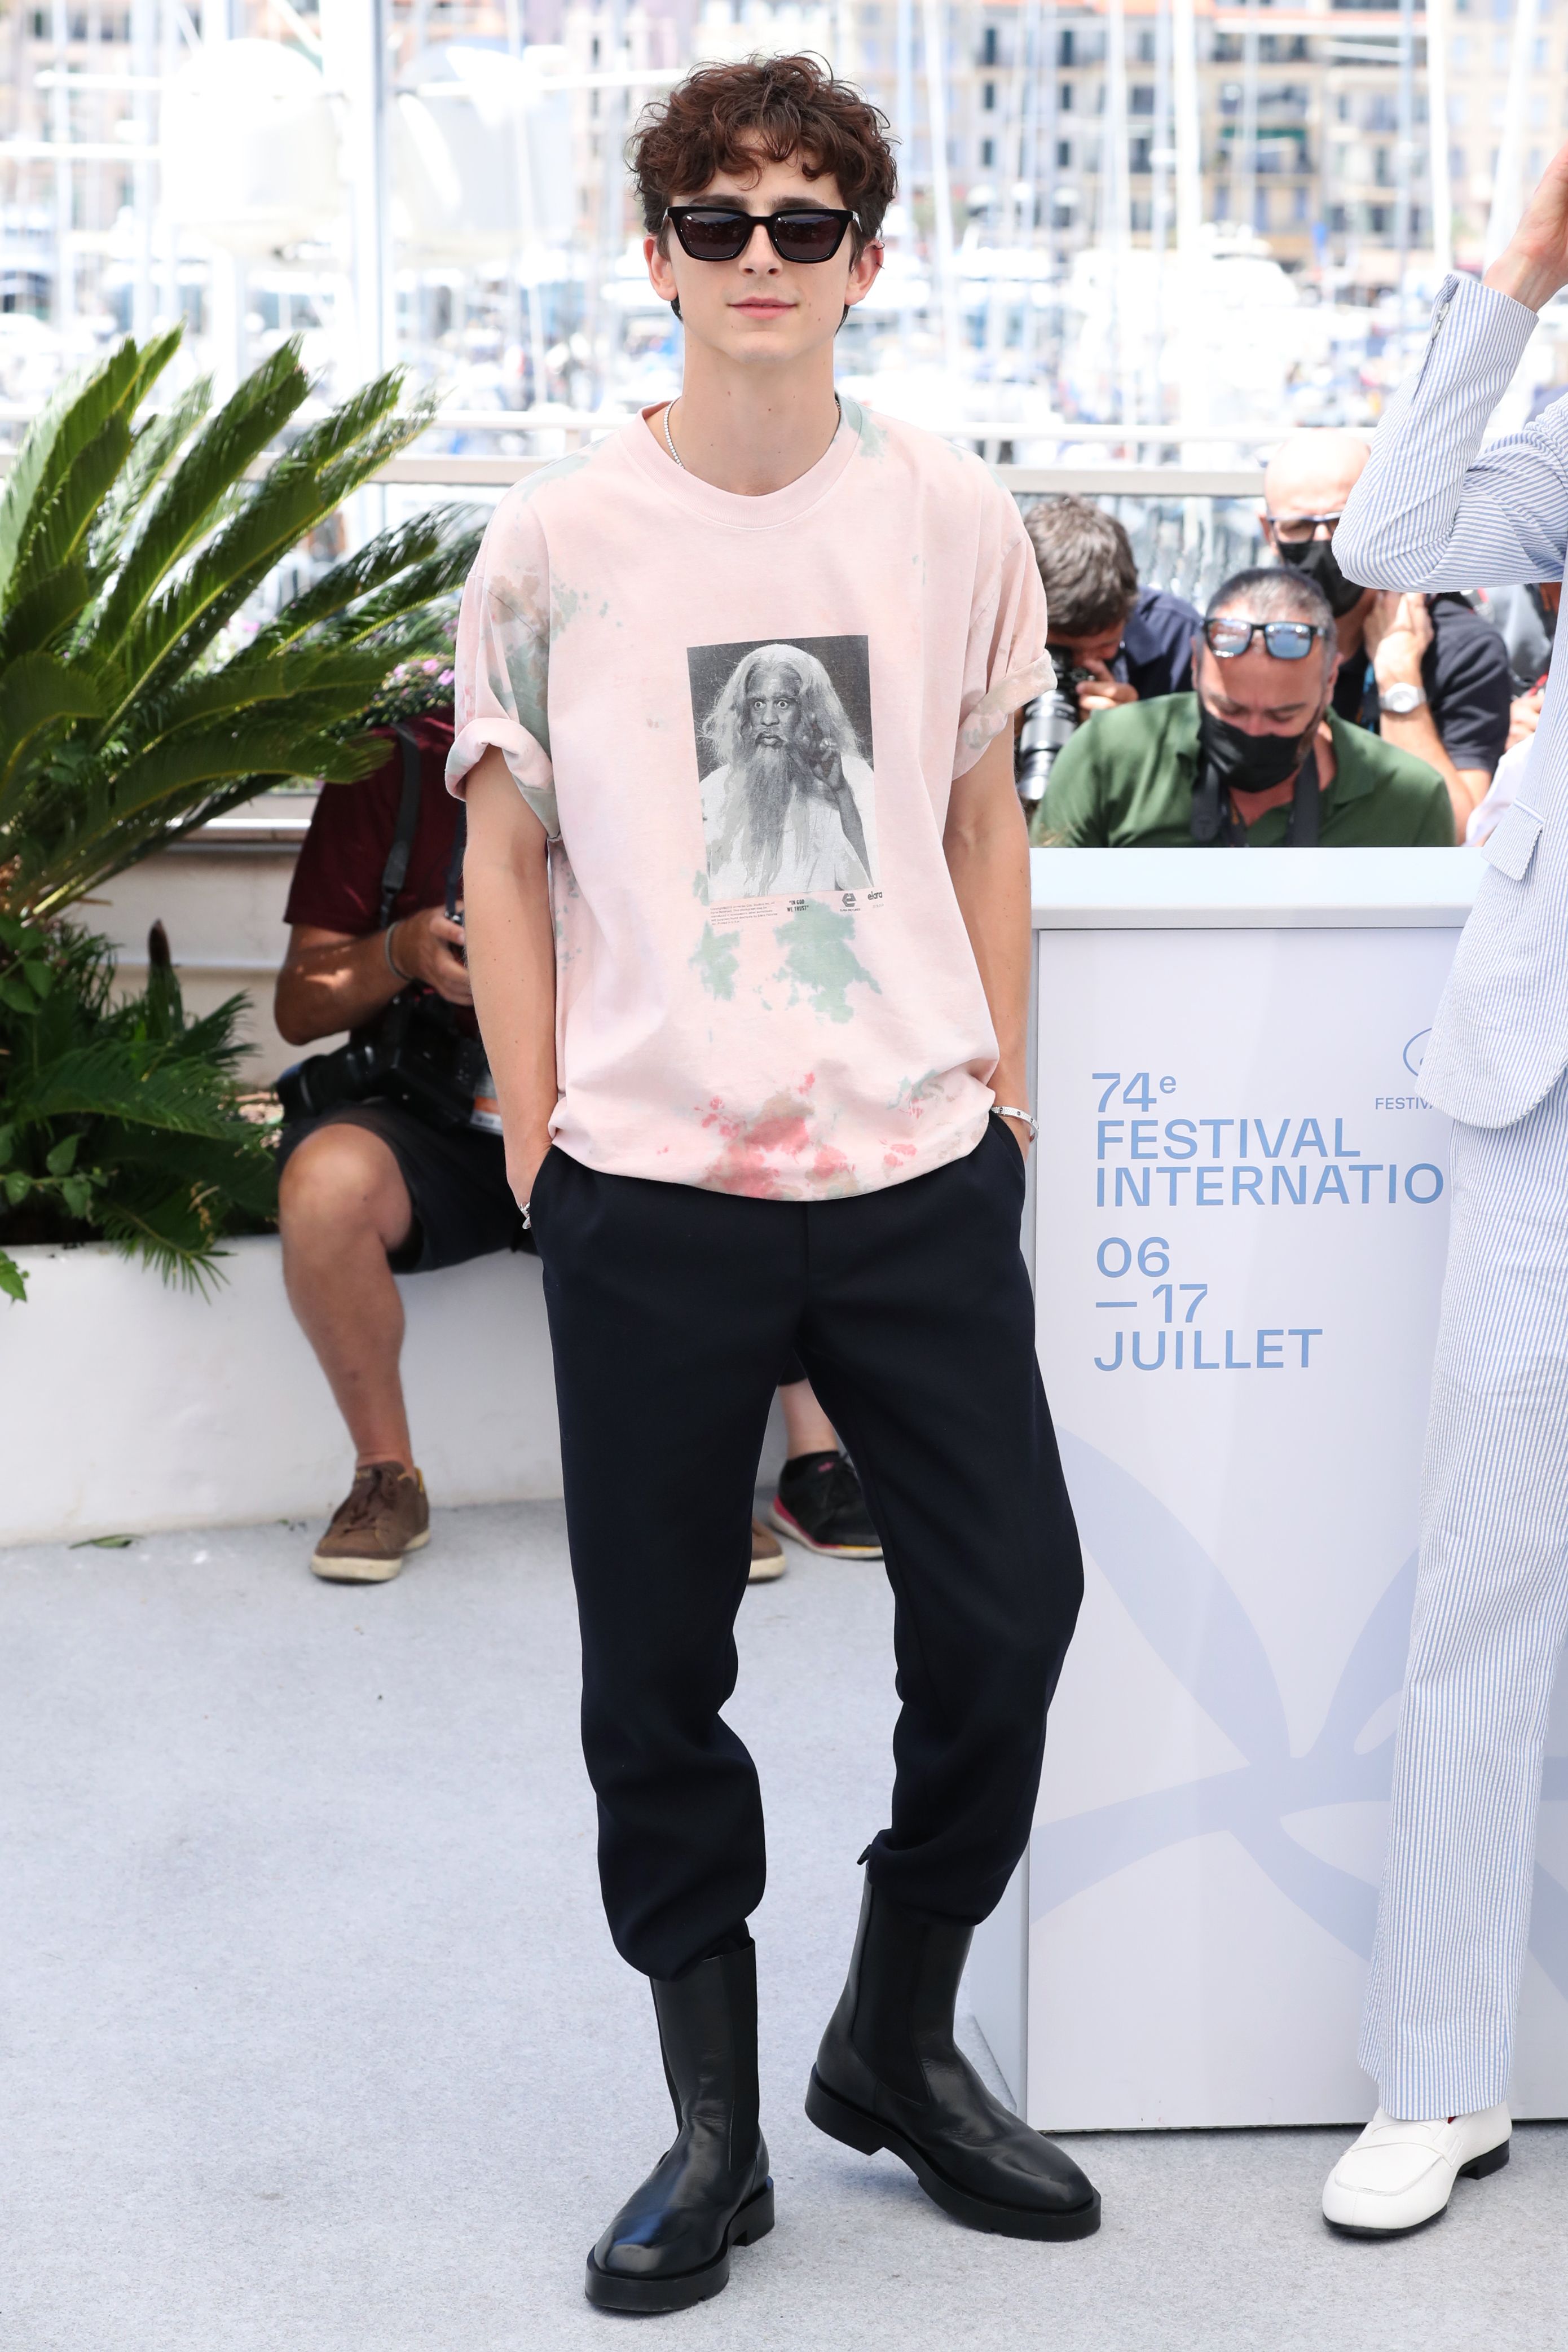 Timothee Chalamet's Fashion at 2021 Cannes Film Festival: Photos